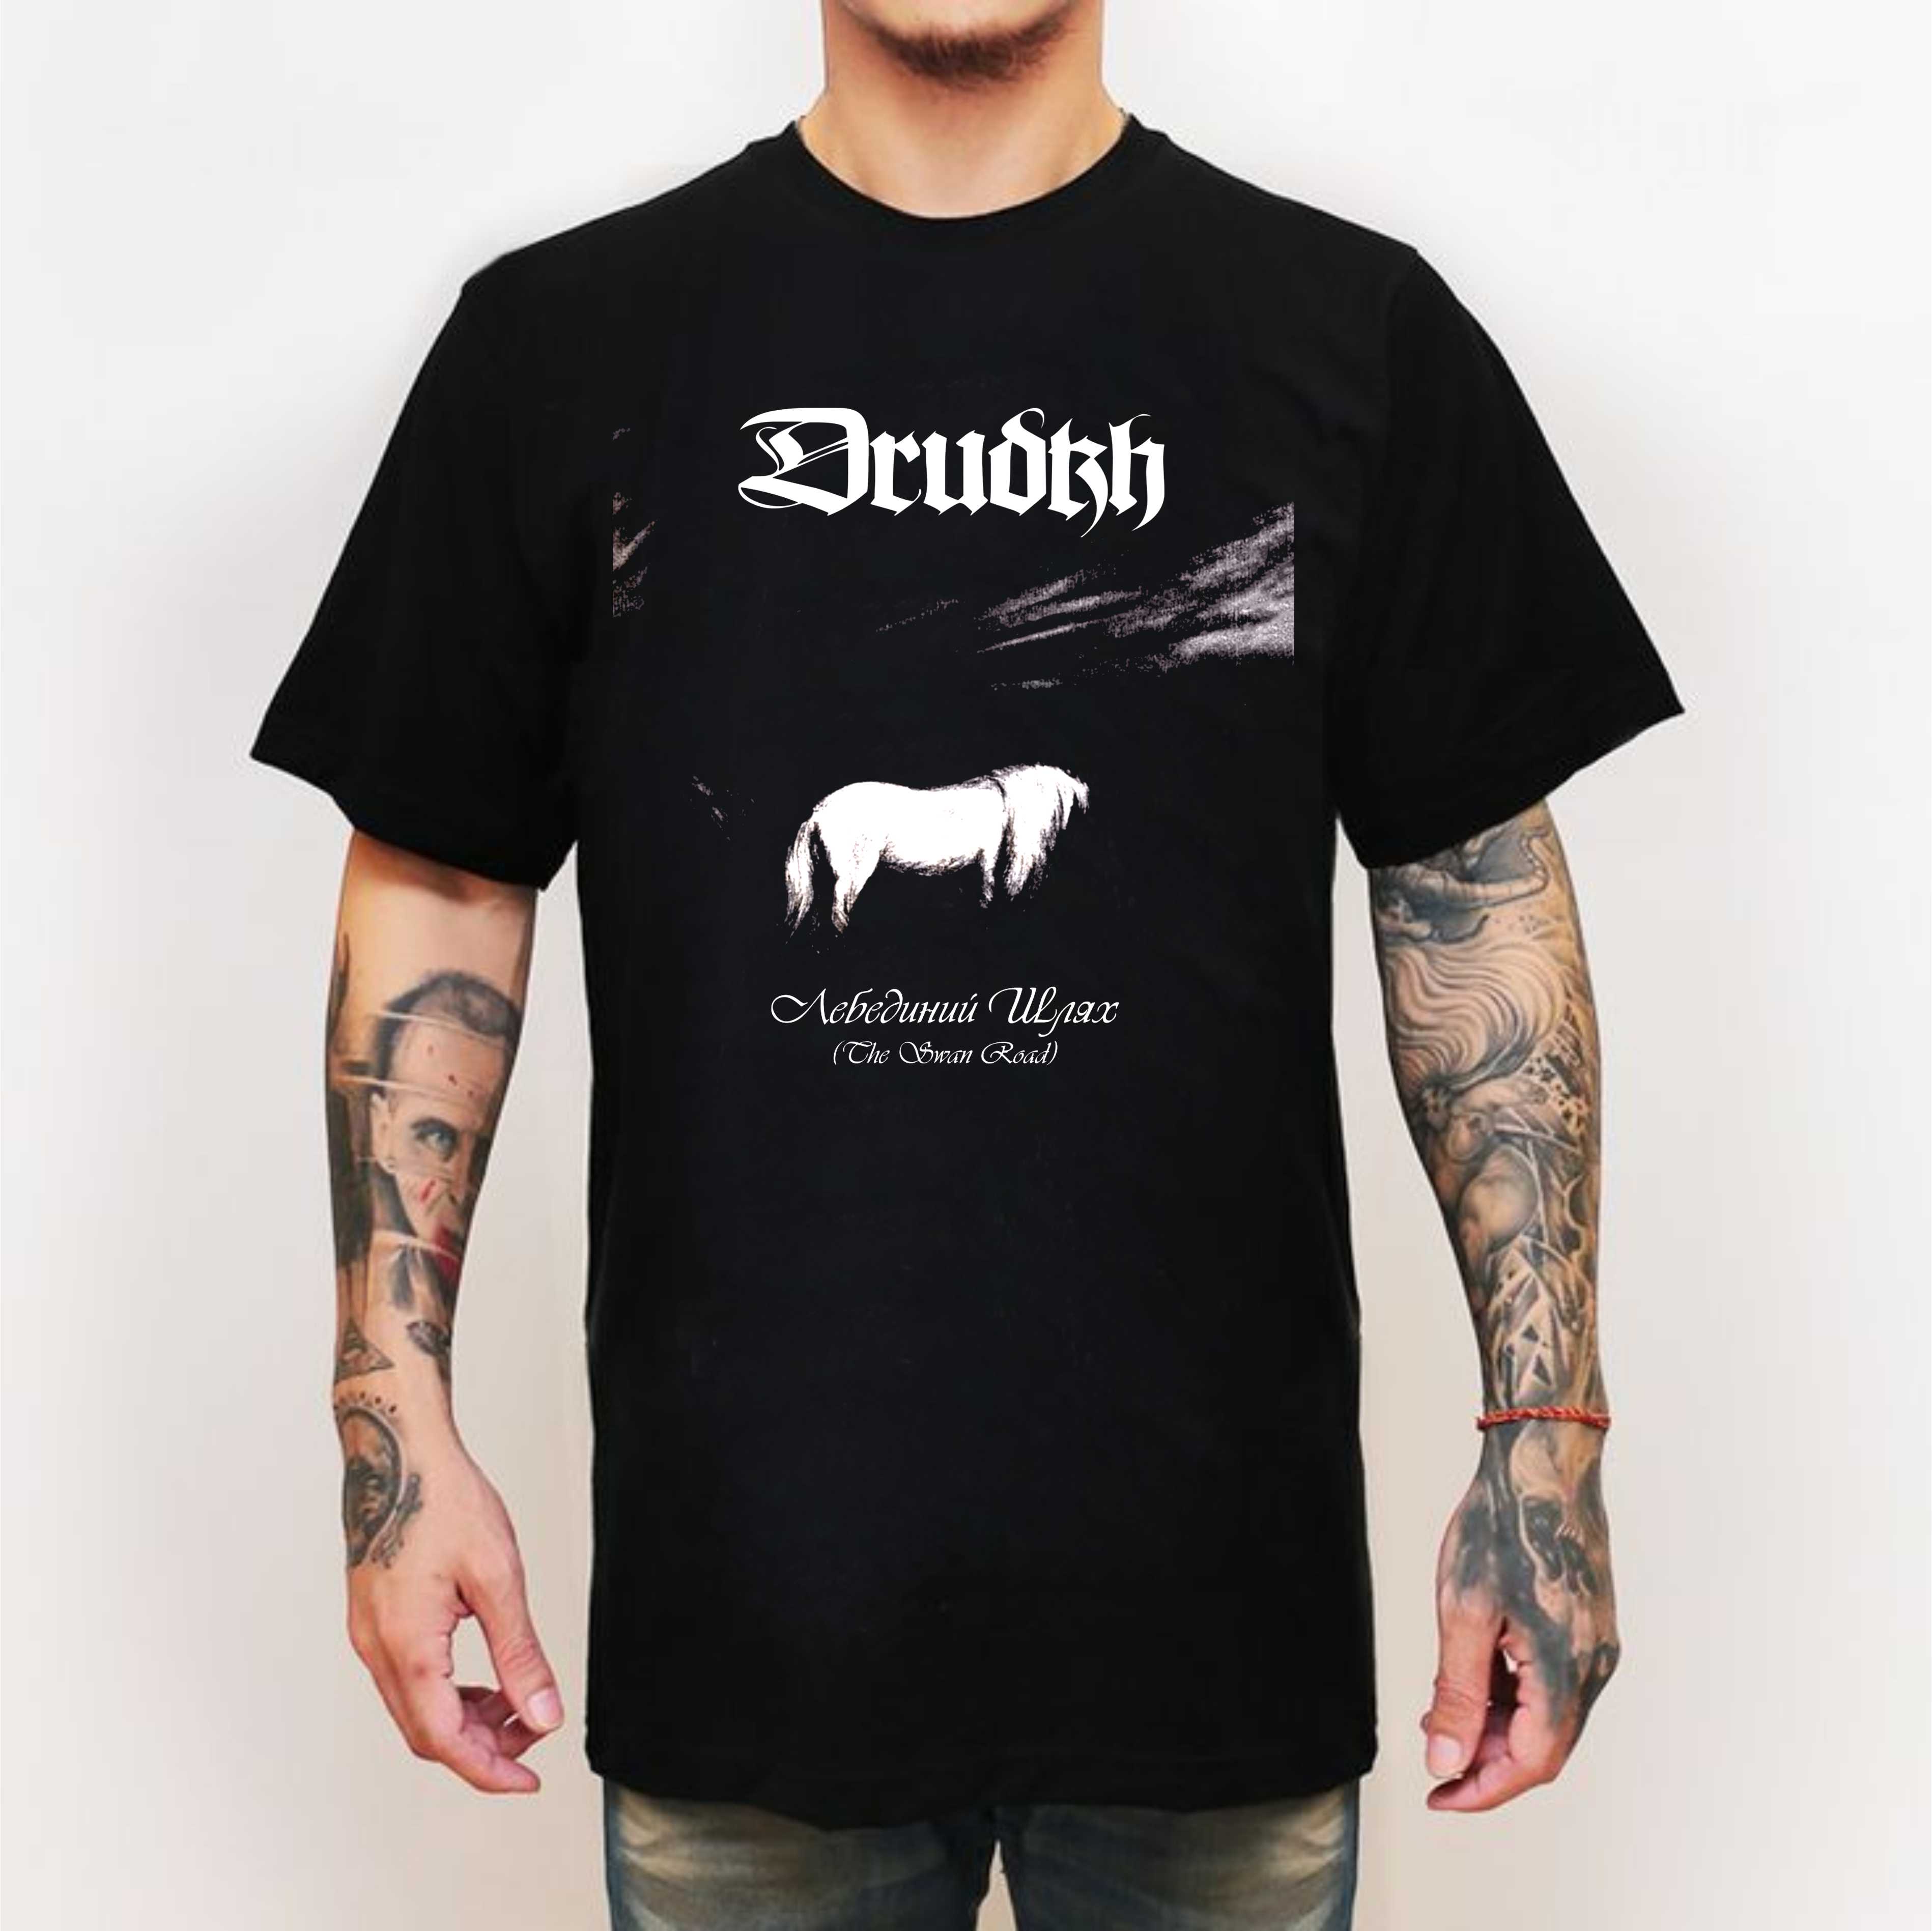 Drudkh The Swan Road Black T-Shirt – Metal & Rock T-shirts and Accessories